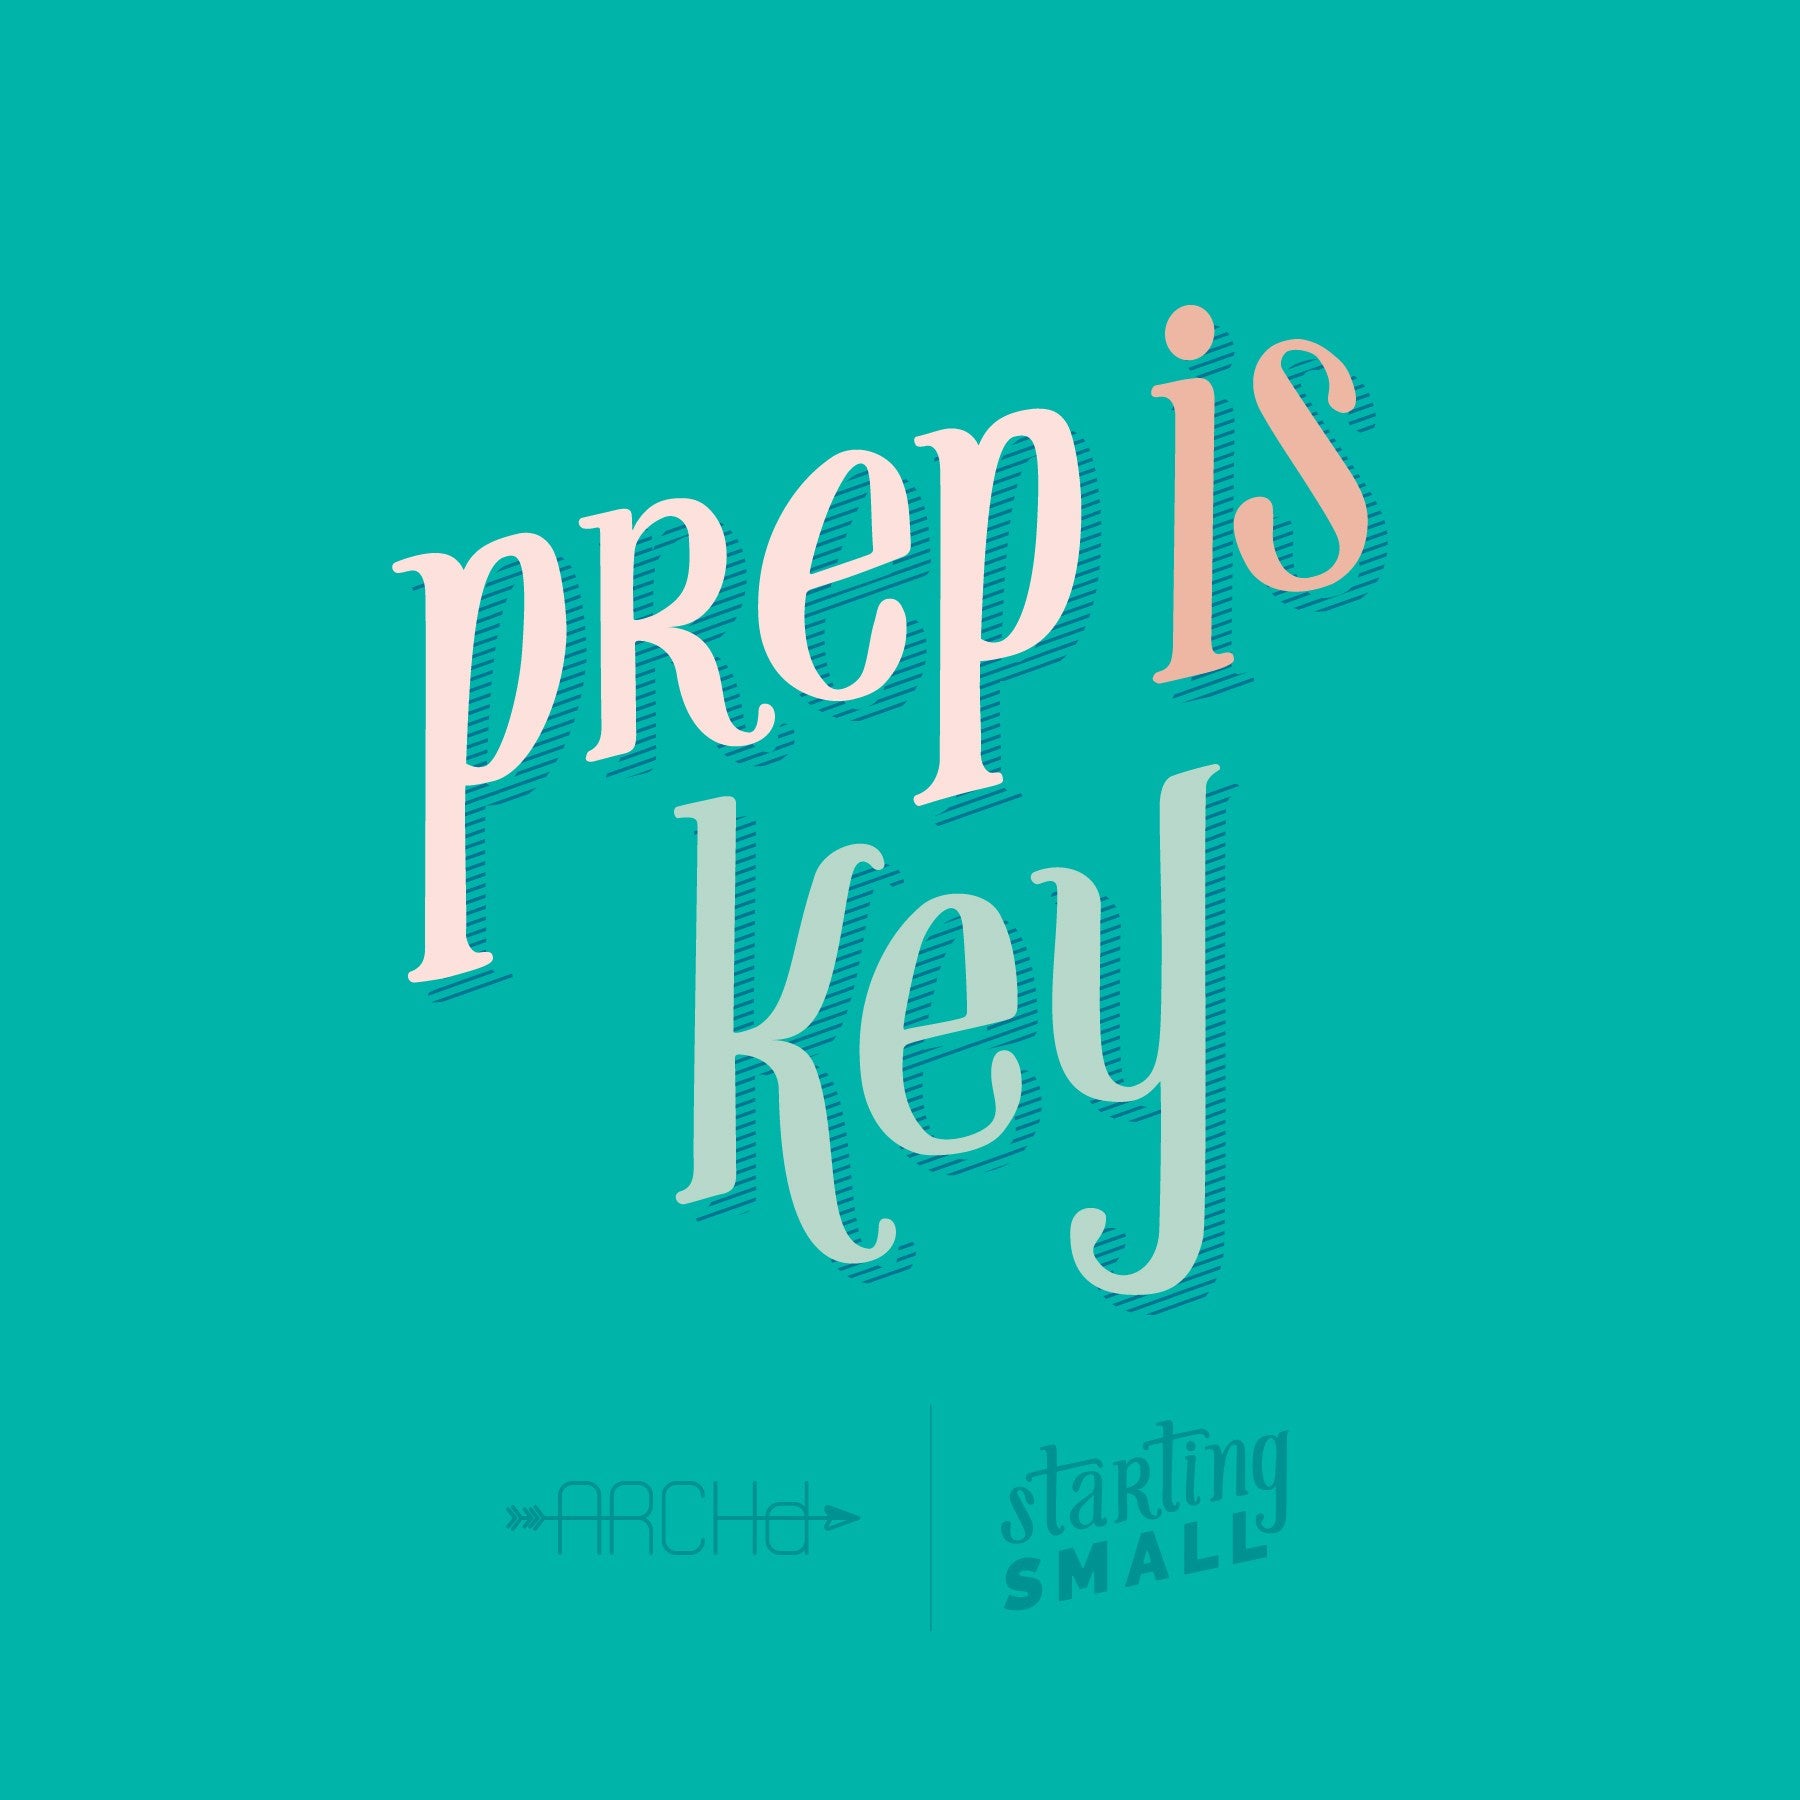 Prep is Key Starting Small a blog series by ARCHd about the Adventures of Starting a Small Business